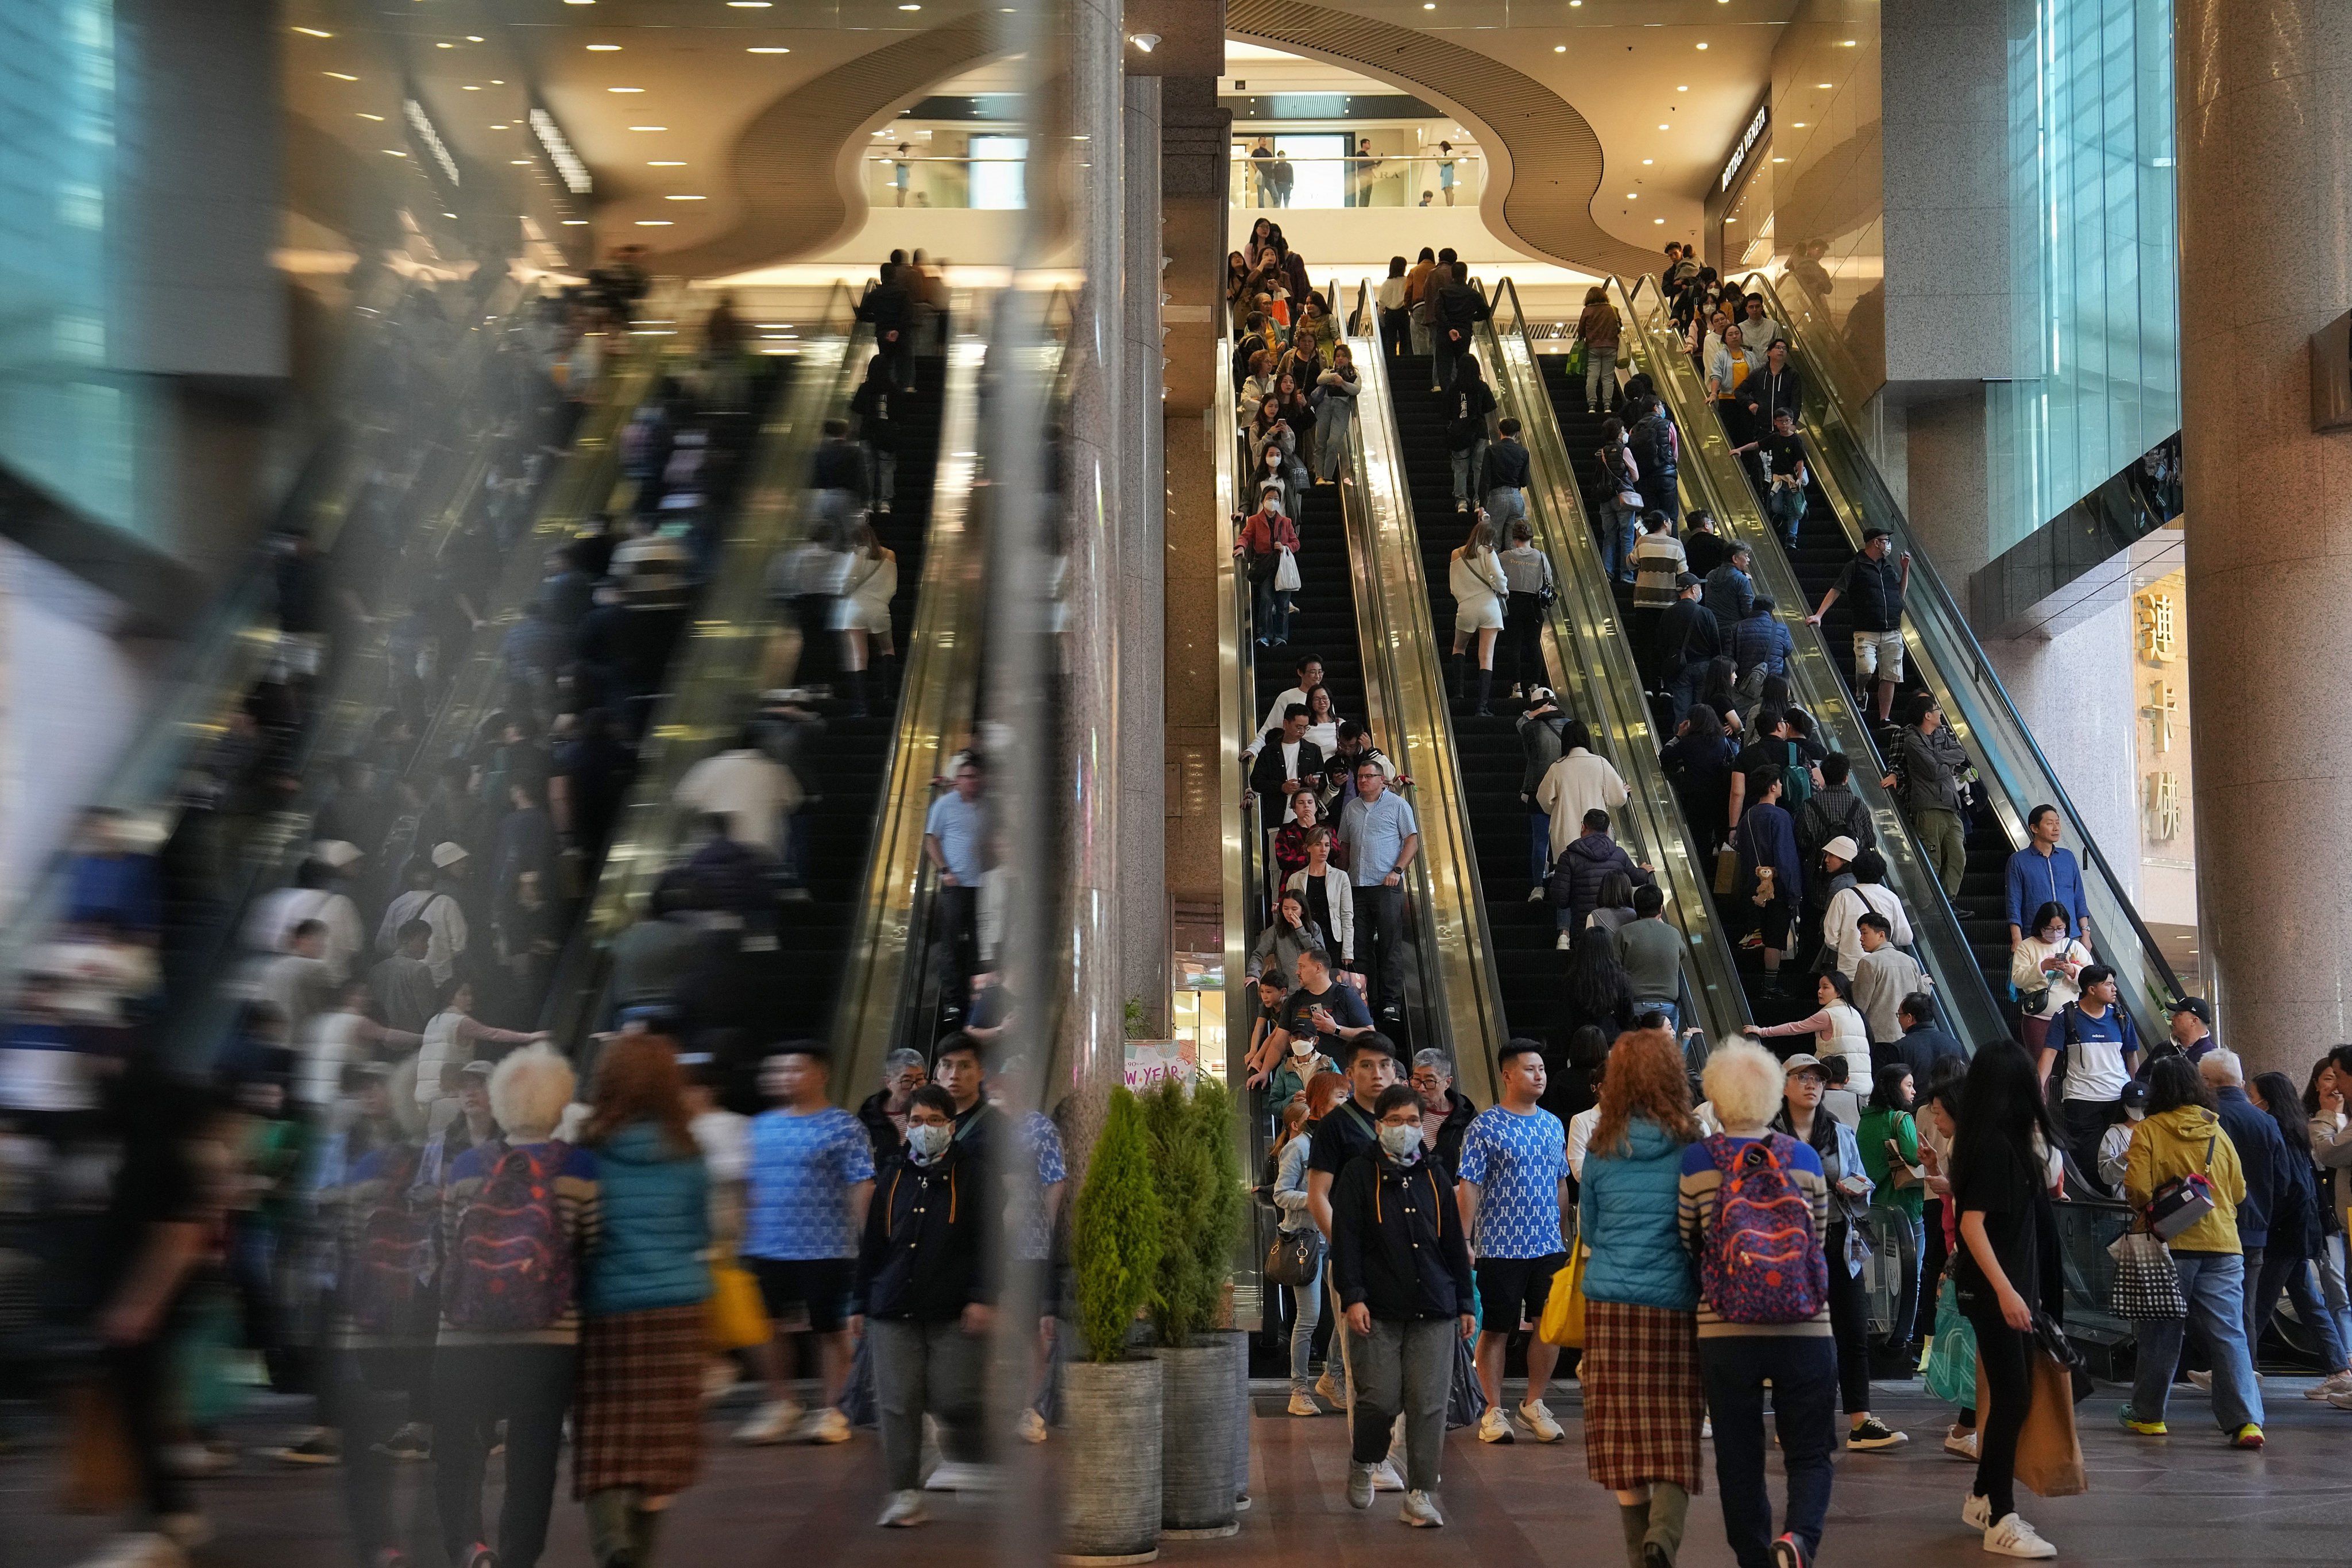 People enter a shopoping mall in Causeway Bay on January 1. A goods and services tax could provide Hong Kong with much-needed revenue. Photo: Elson LI